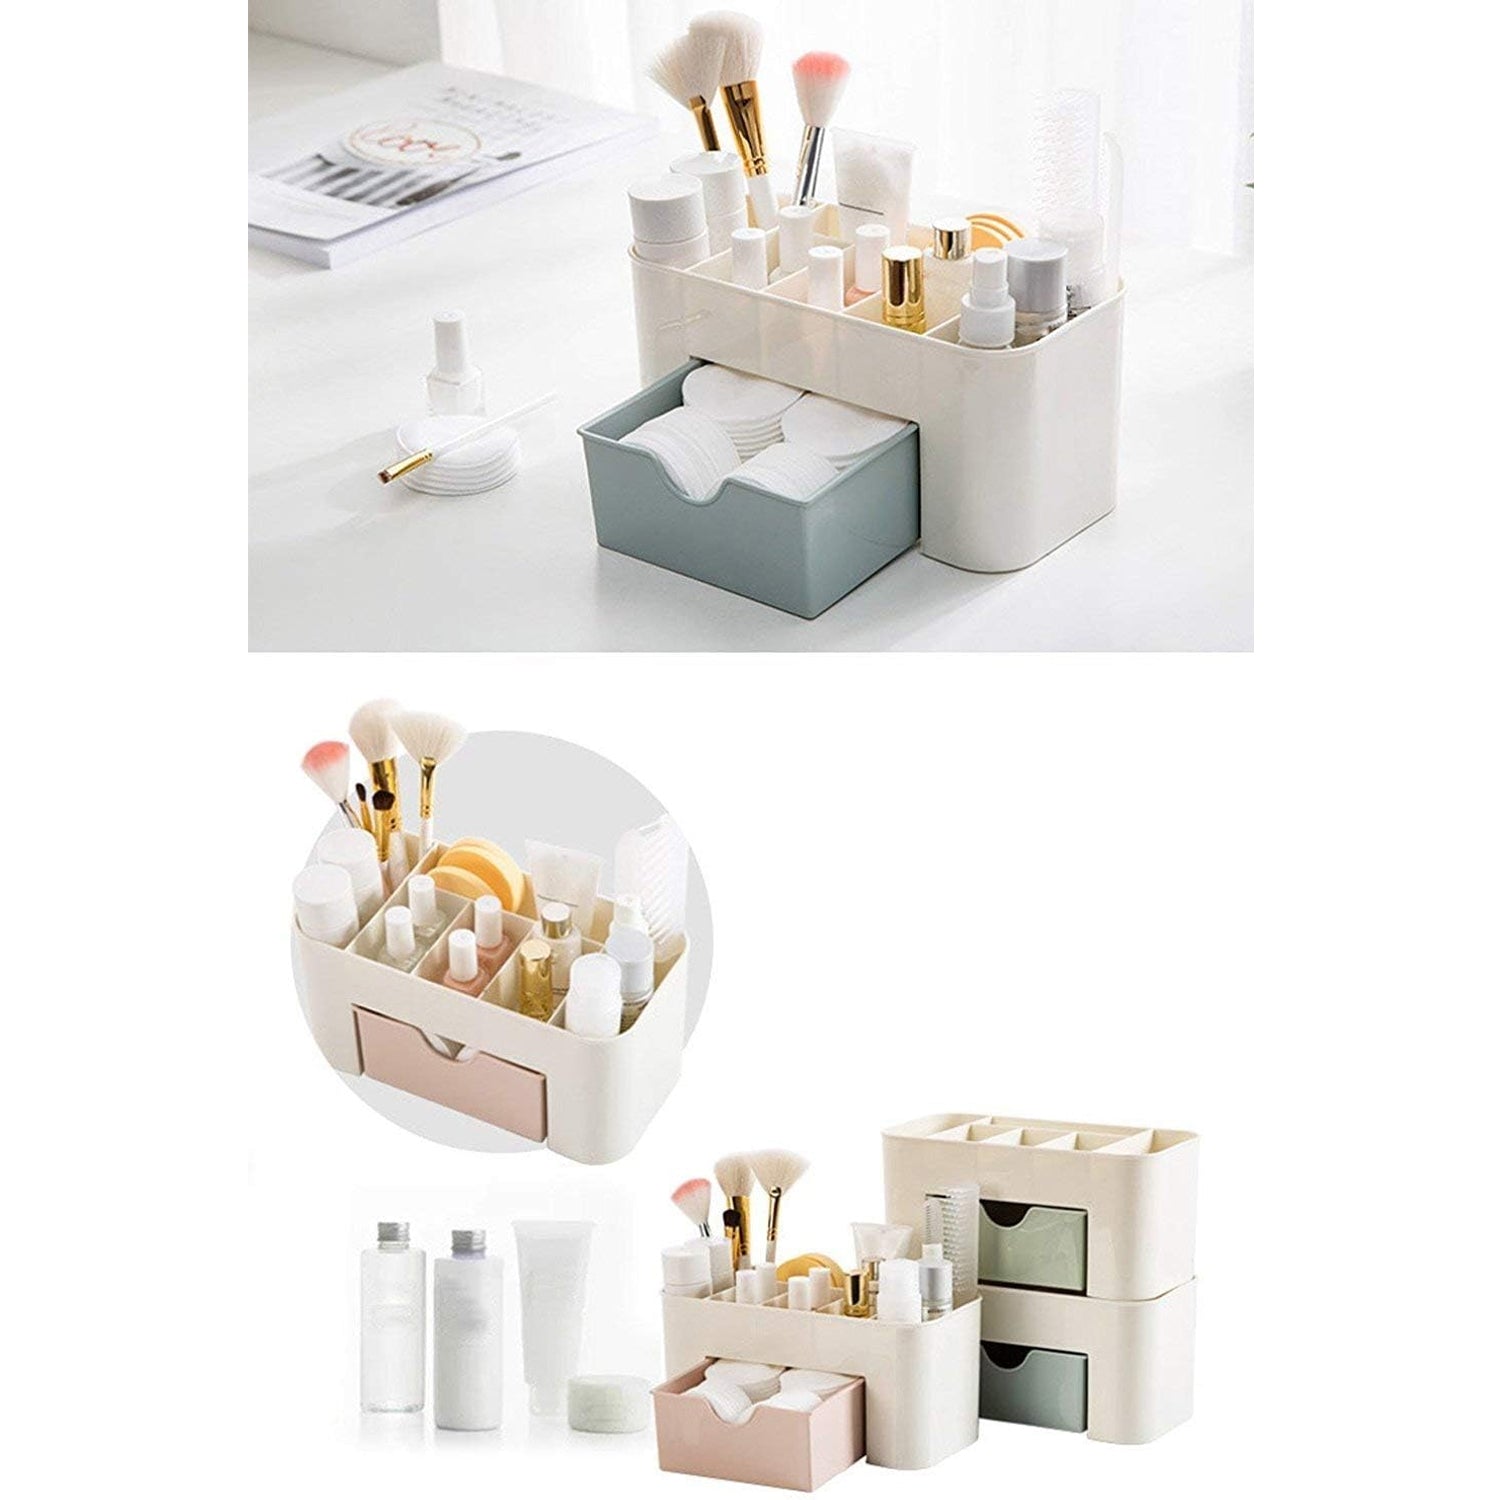 0360B Cutlery Box Used for storing makeup Equipments and kits used by Womens and ladies. DeoDap